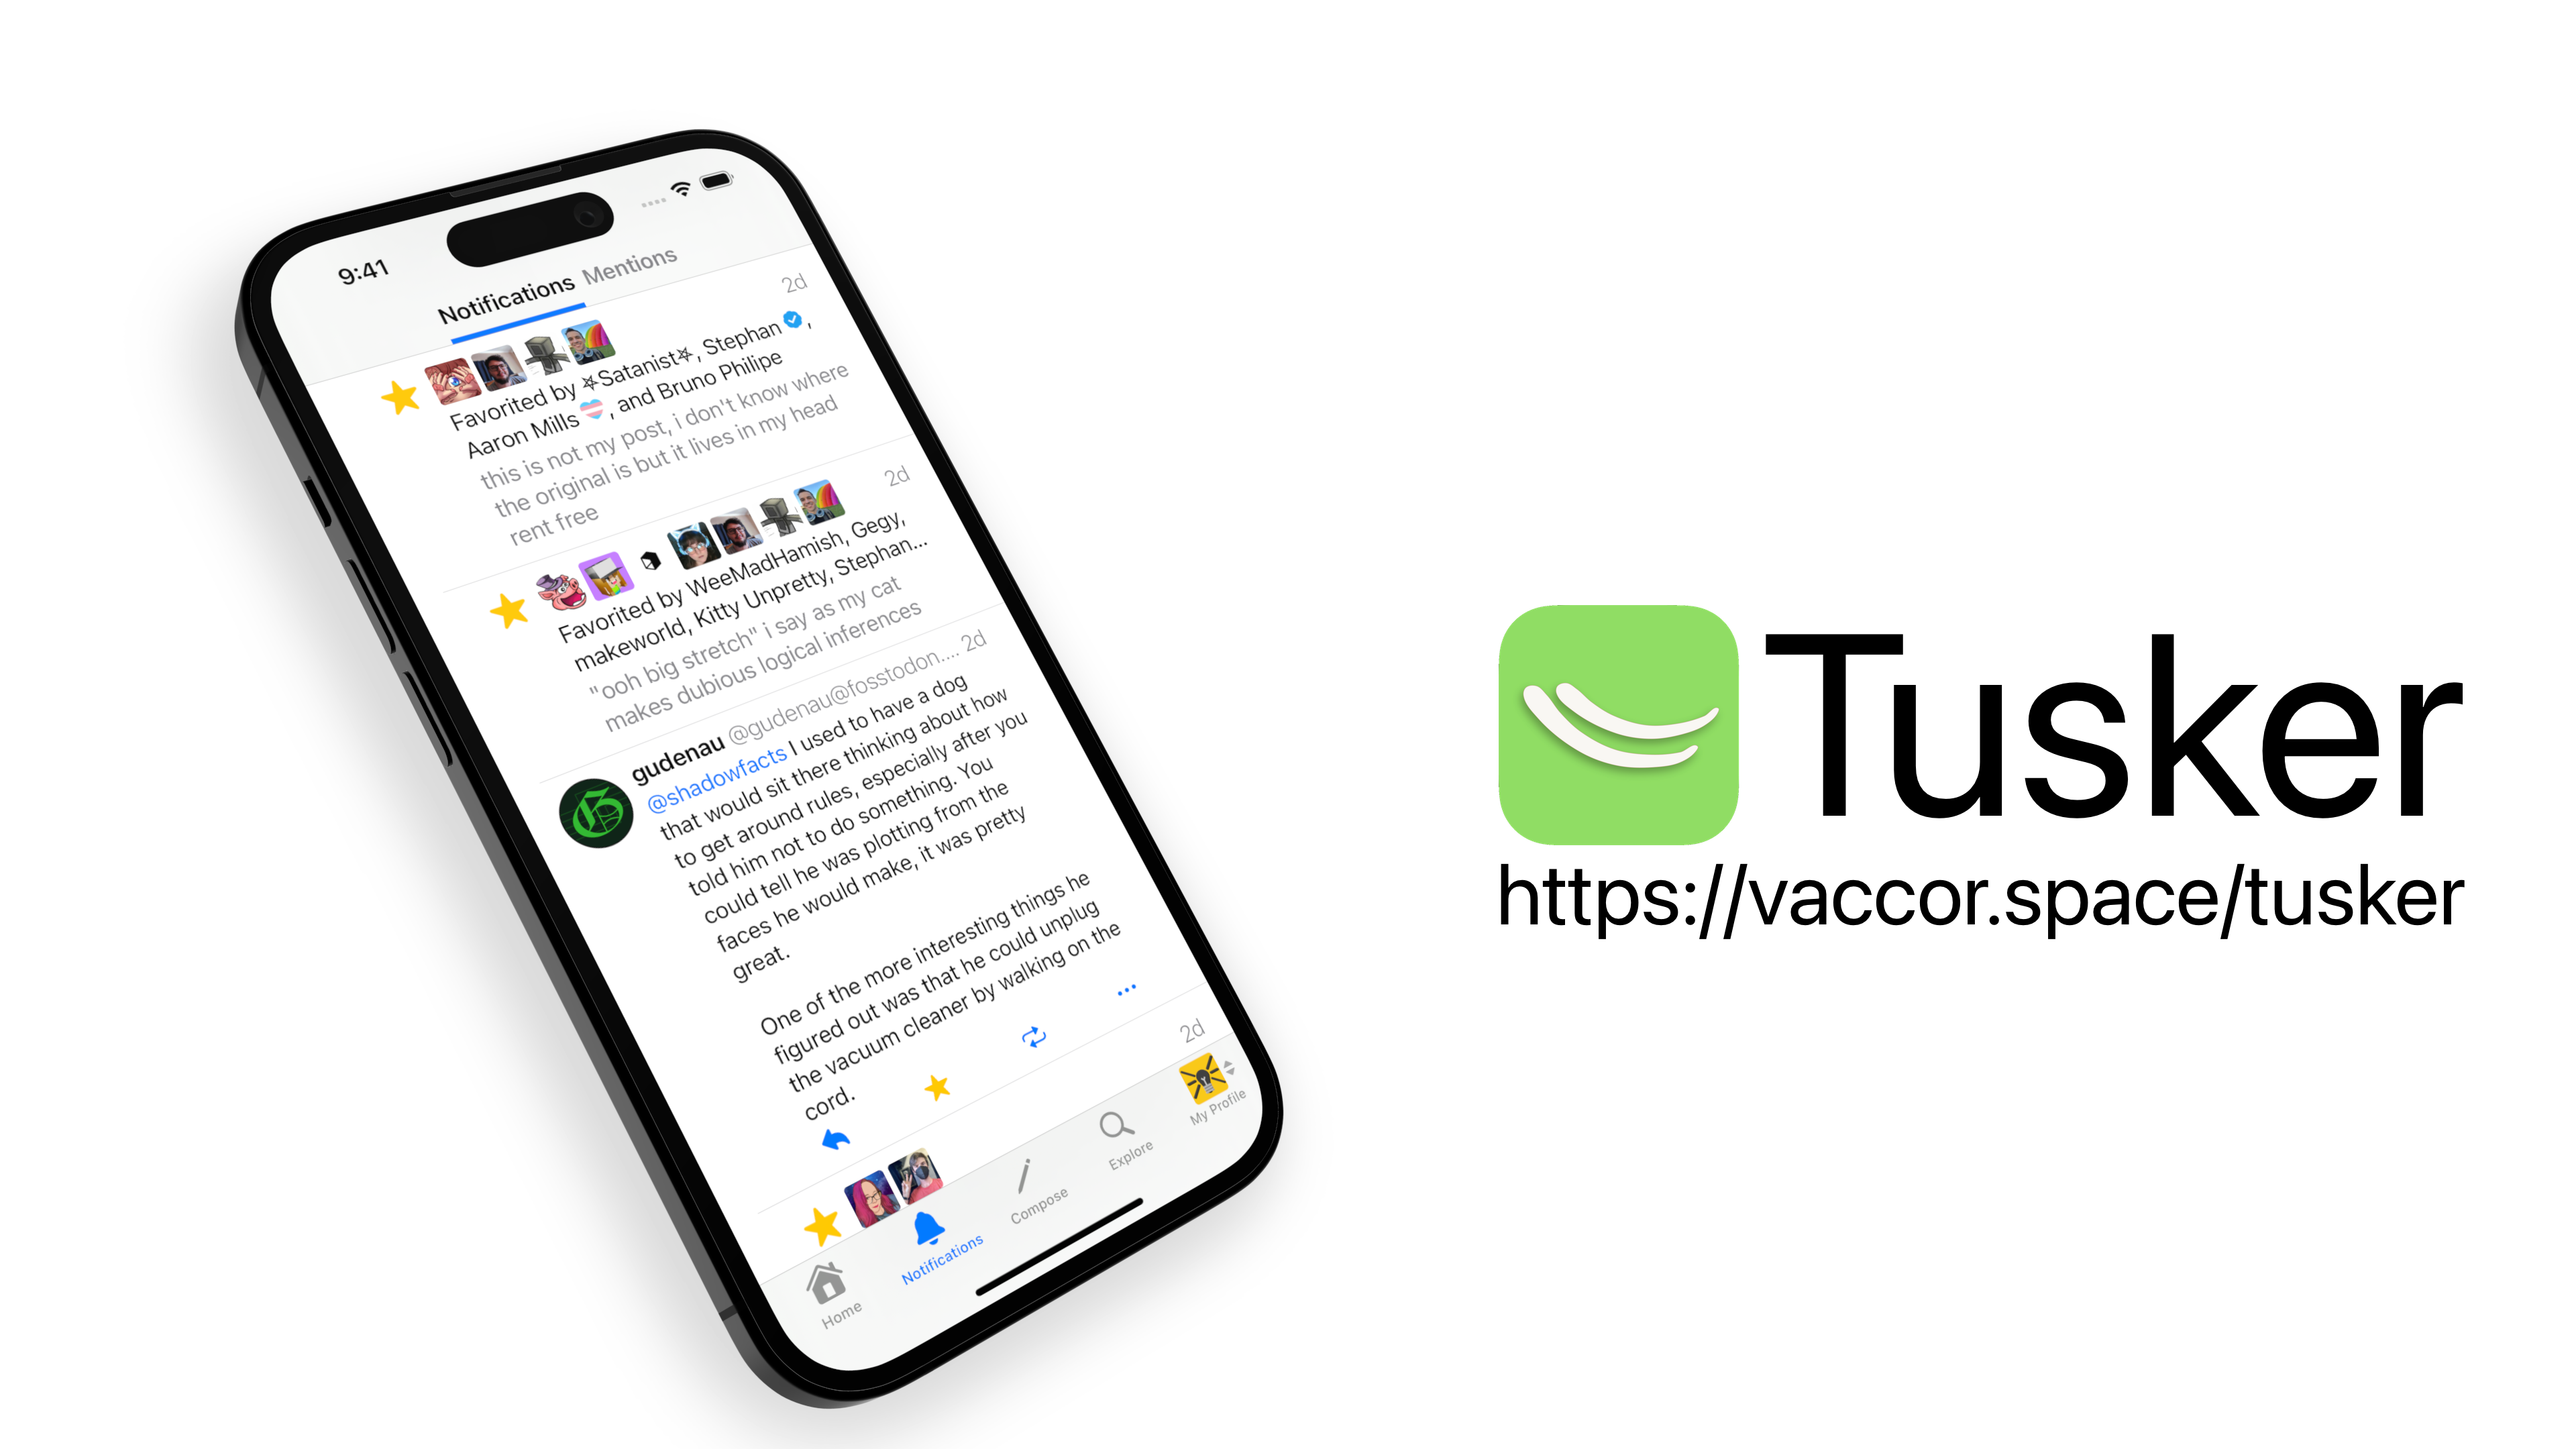 Tusker notifications screen on a phone tilted back at an angle, with the app icon, name, and URL